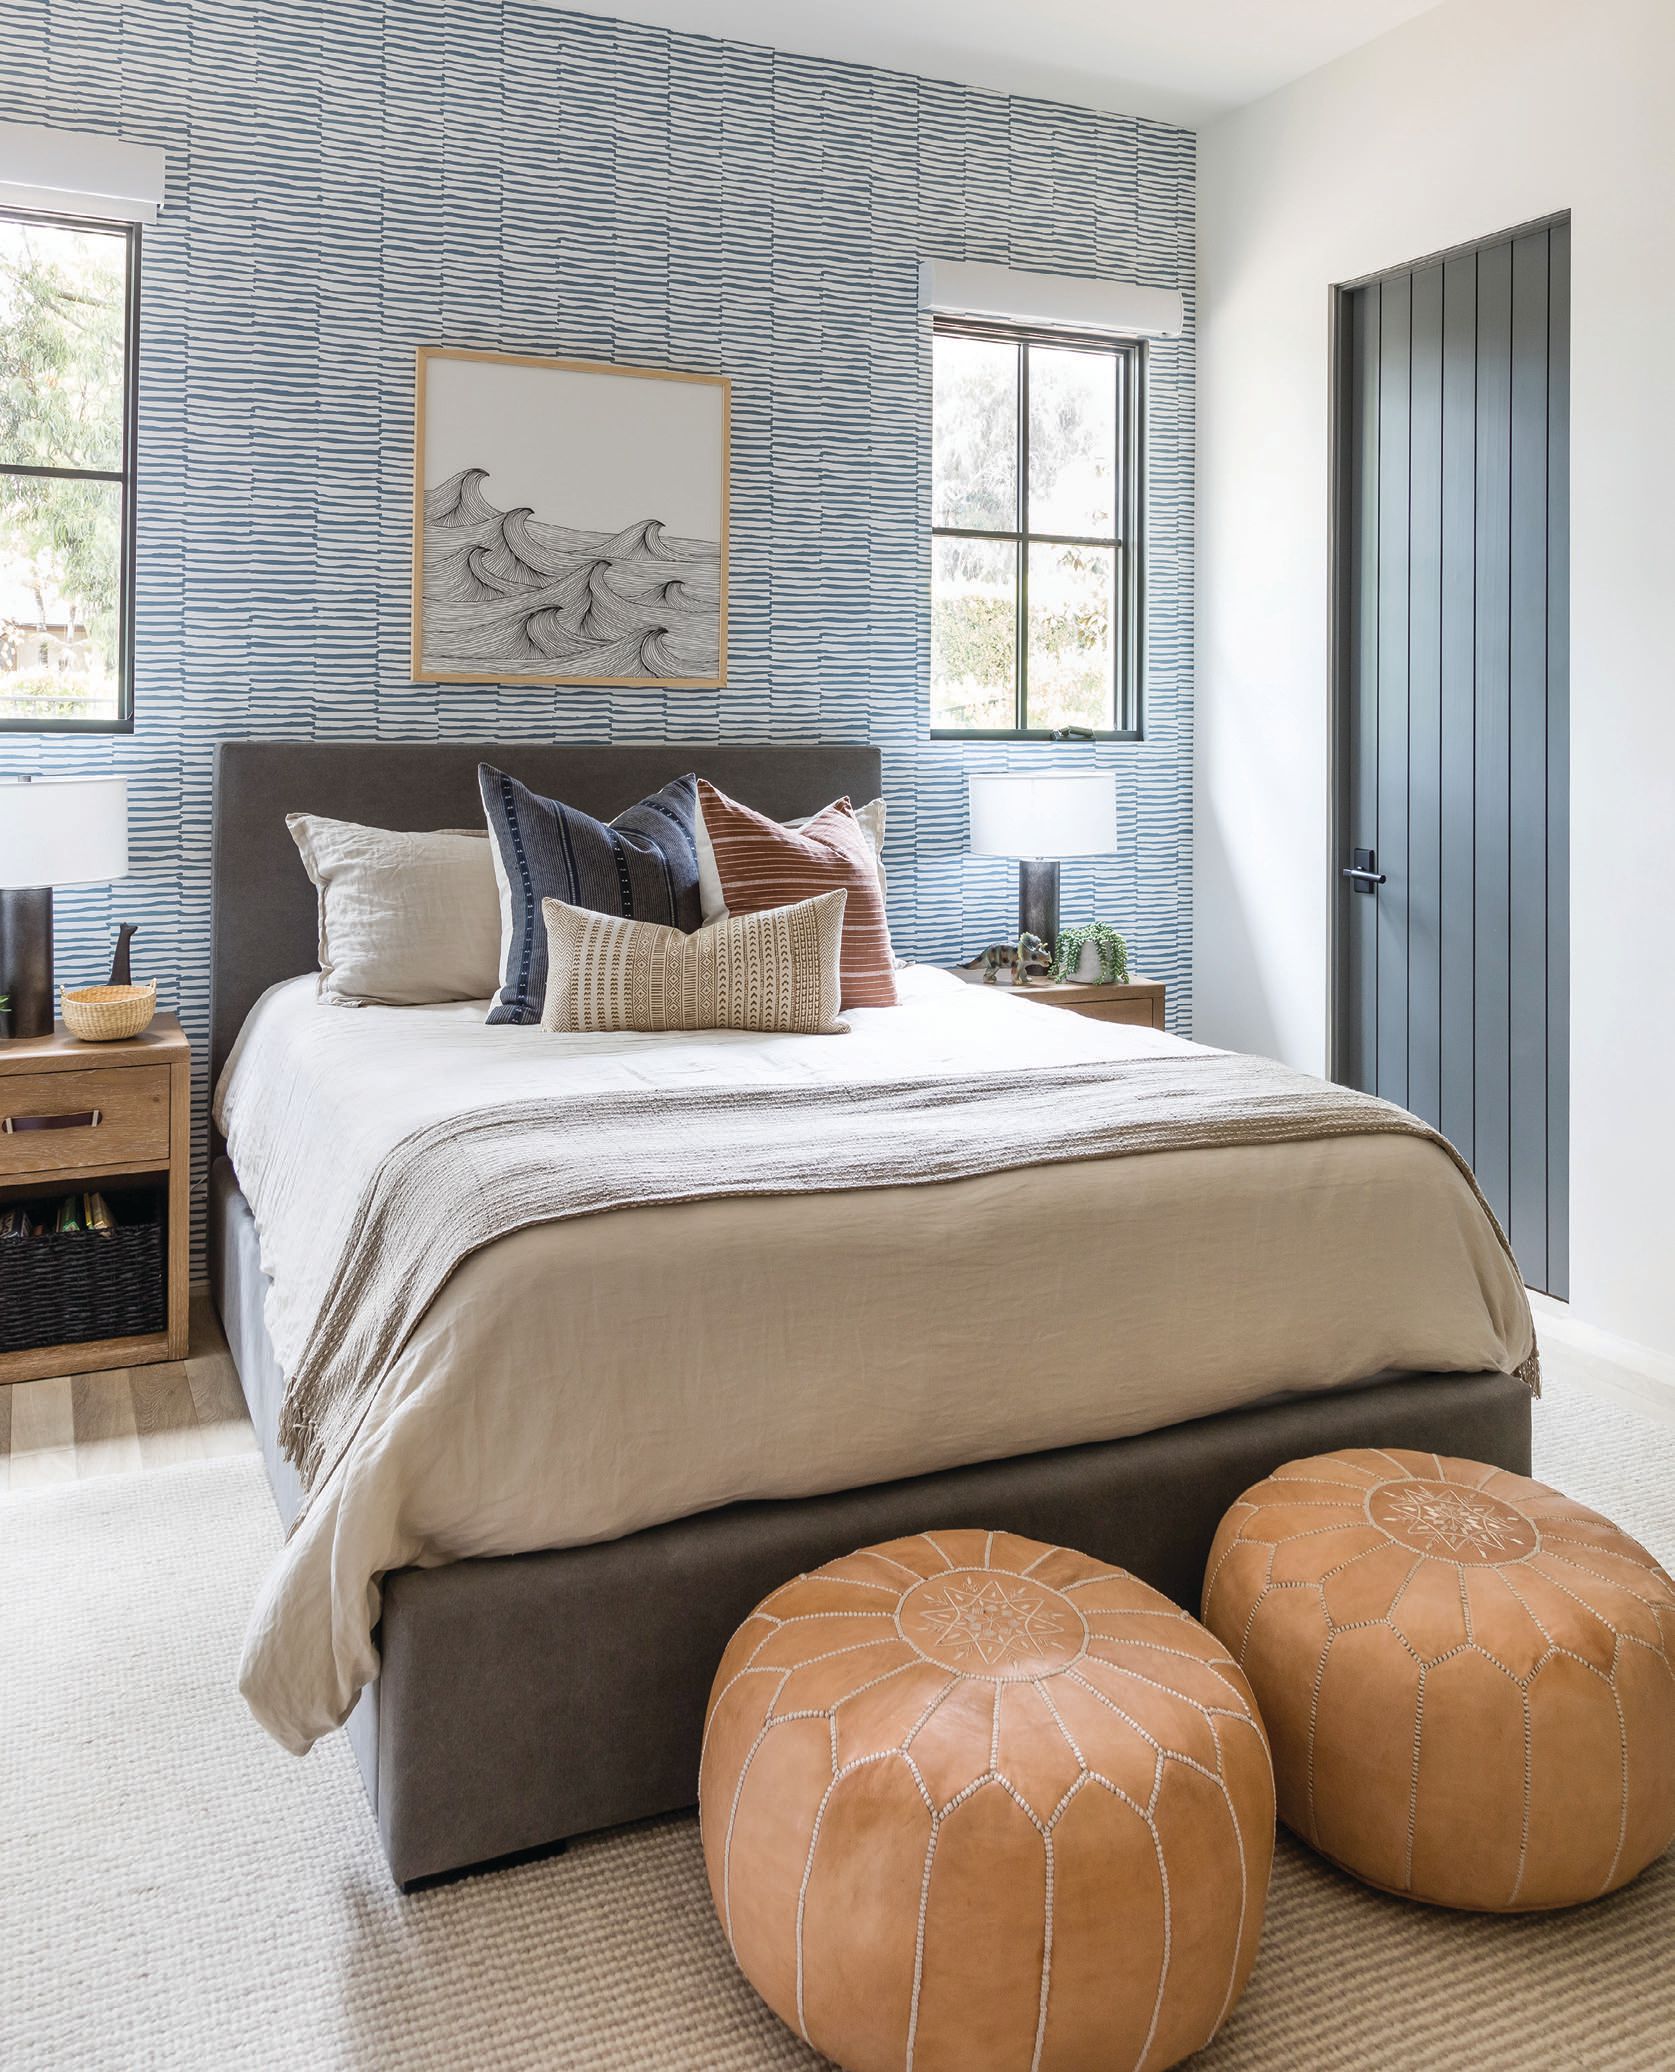 Two boys bedrooms nod to California coastal style with different shades of blue and gray woven throughout. PHOTOGRAPHED BY VANESSA LENTINE